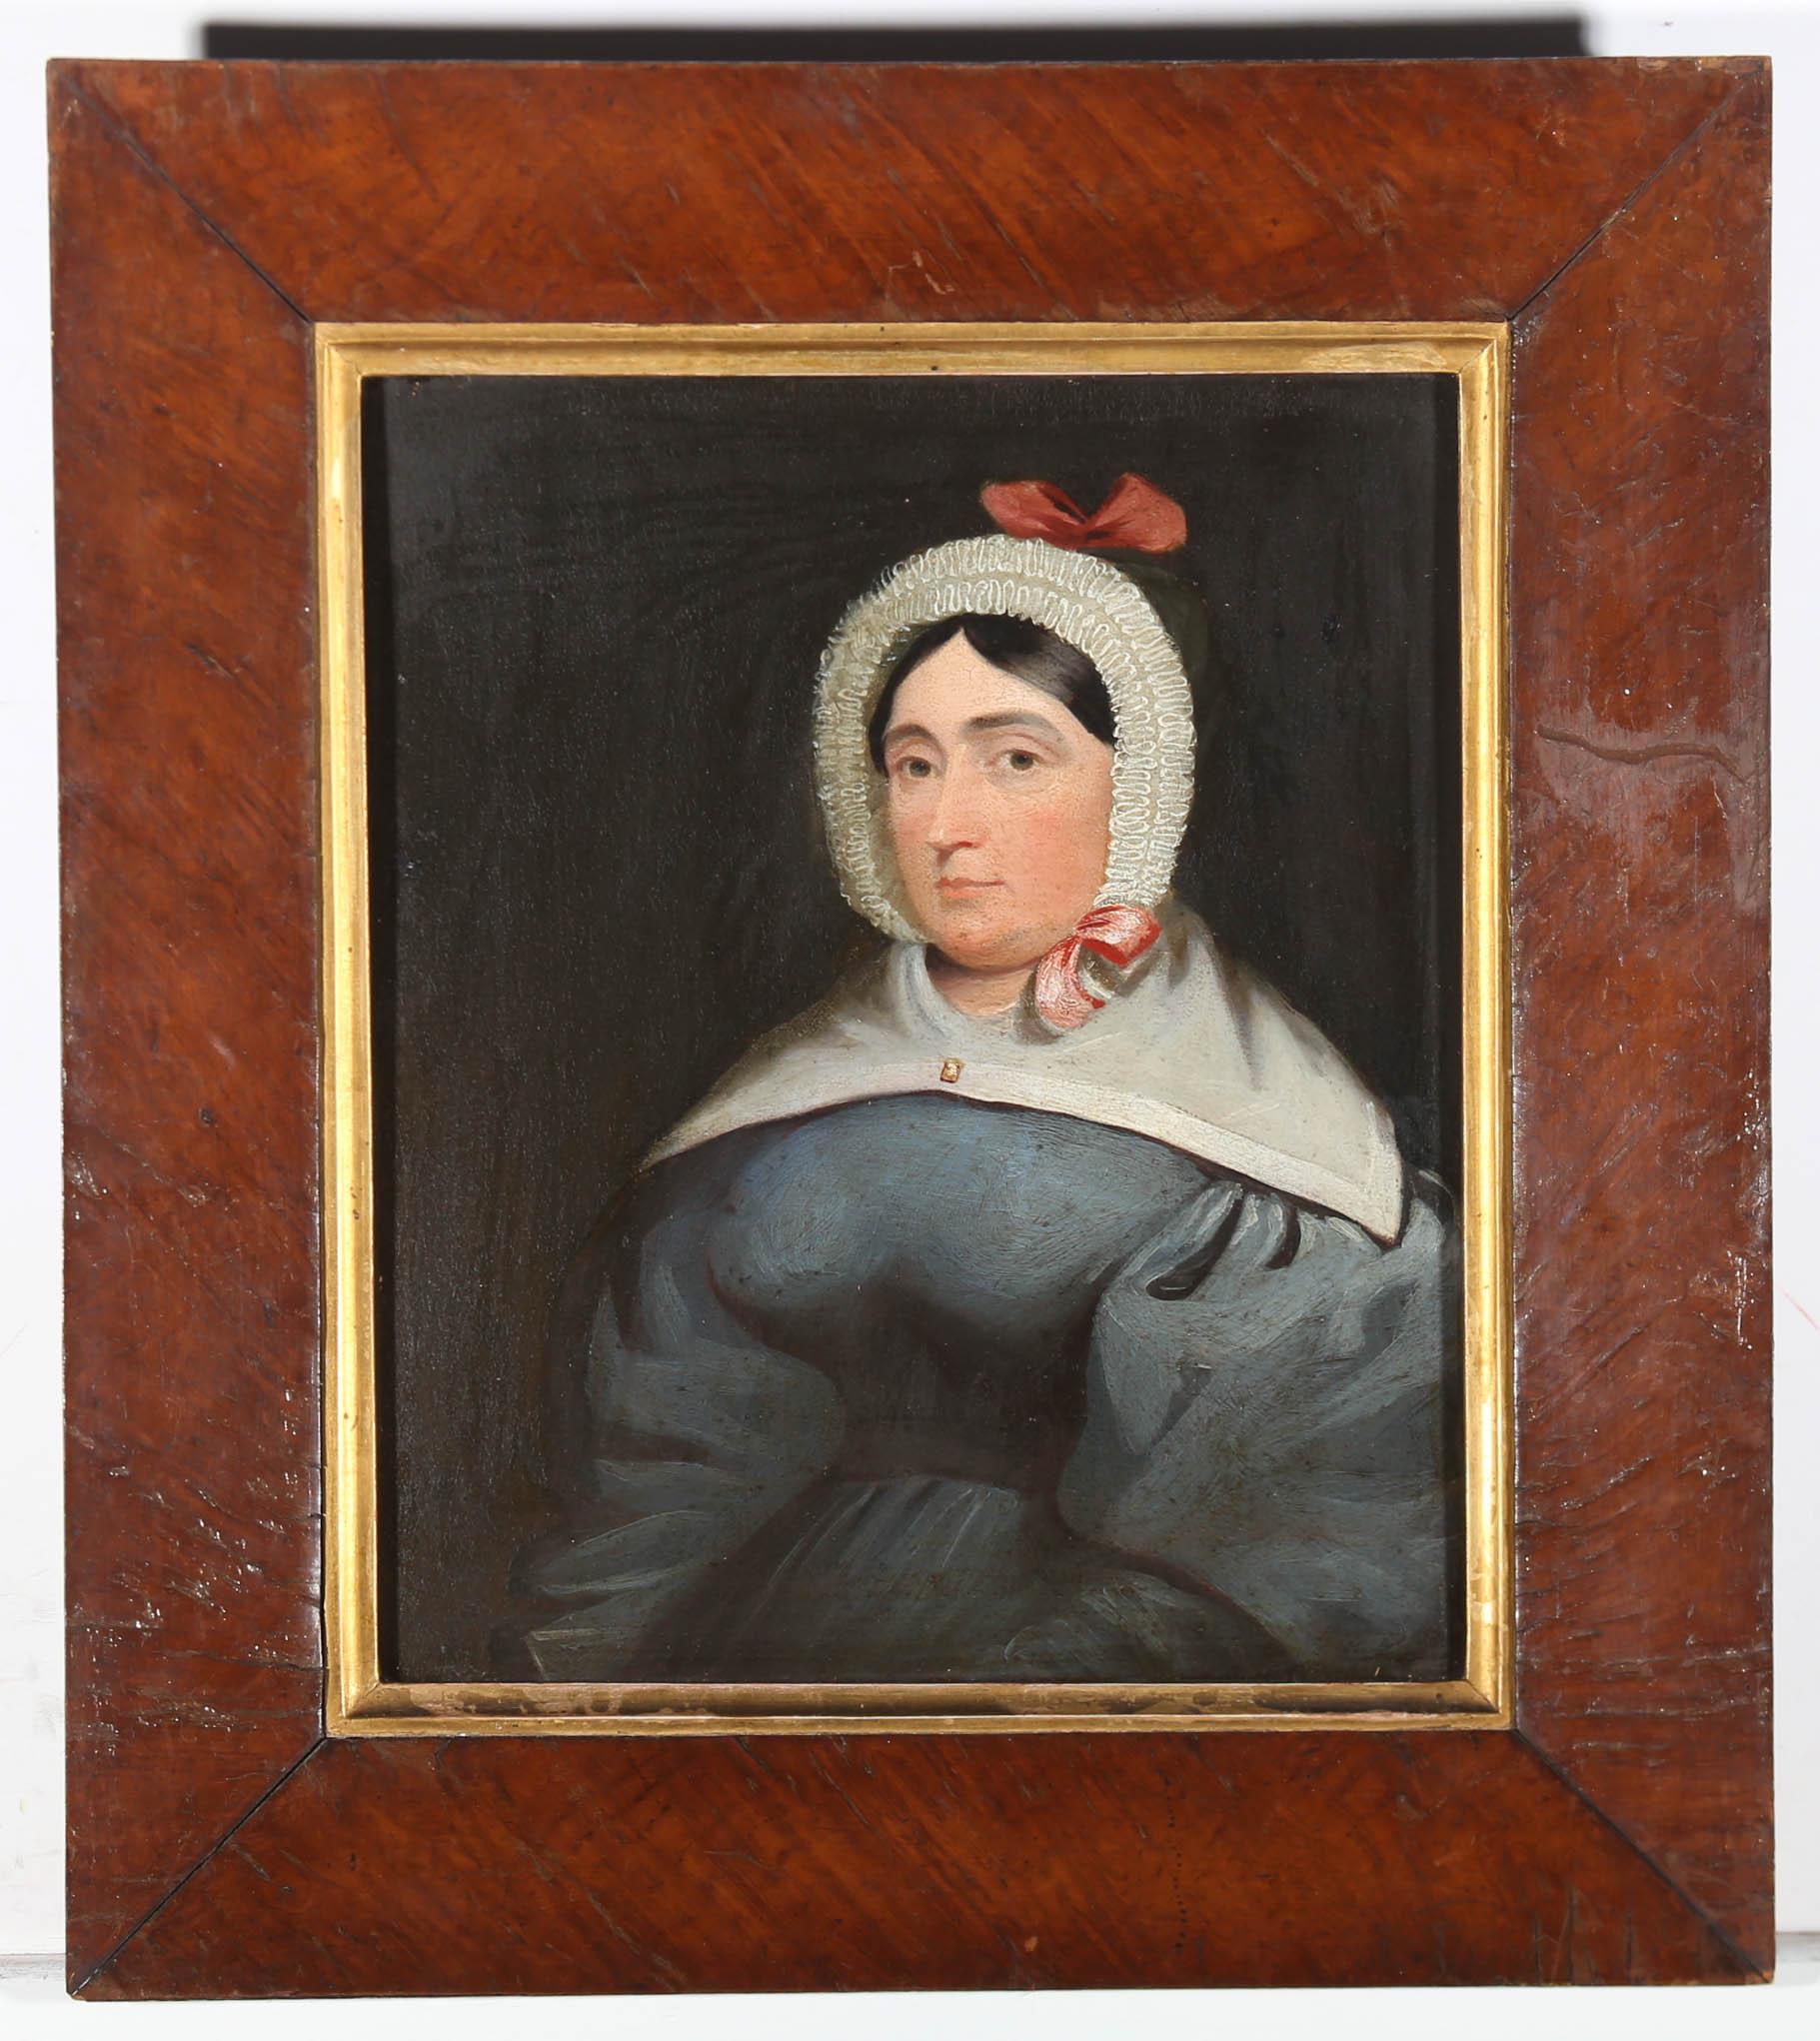 A very fine example of early 19th Century portraiture, showing Miss Robinson, nicknamed Robbie, the housekeeper of Normanby Castle in Yorkshire, for Lord Normanby ( Constantine Phipps, 2nd Earl of Mulgrave). The Normanby title had become extinct in